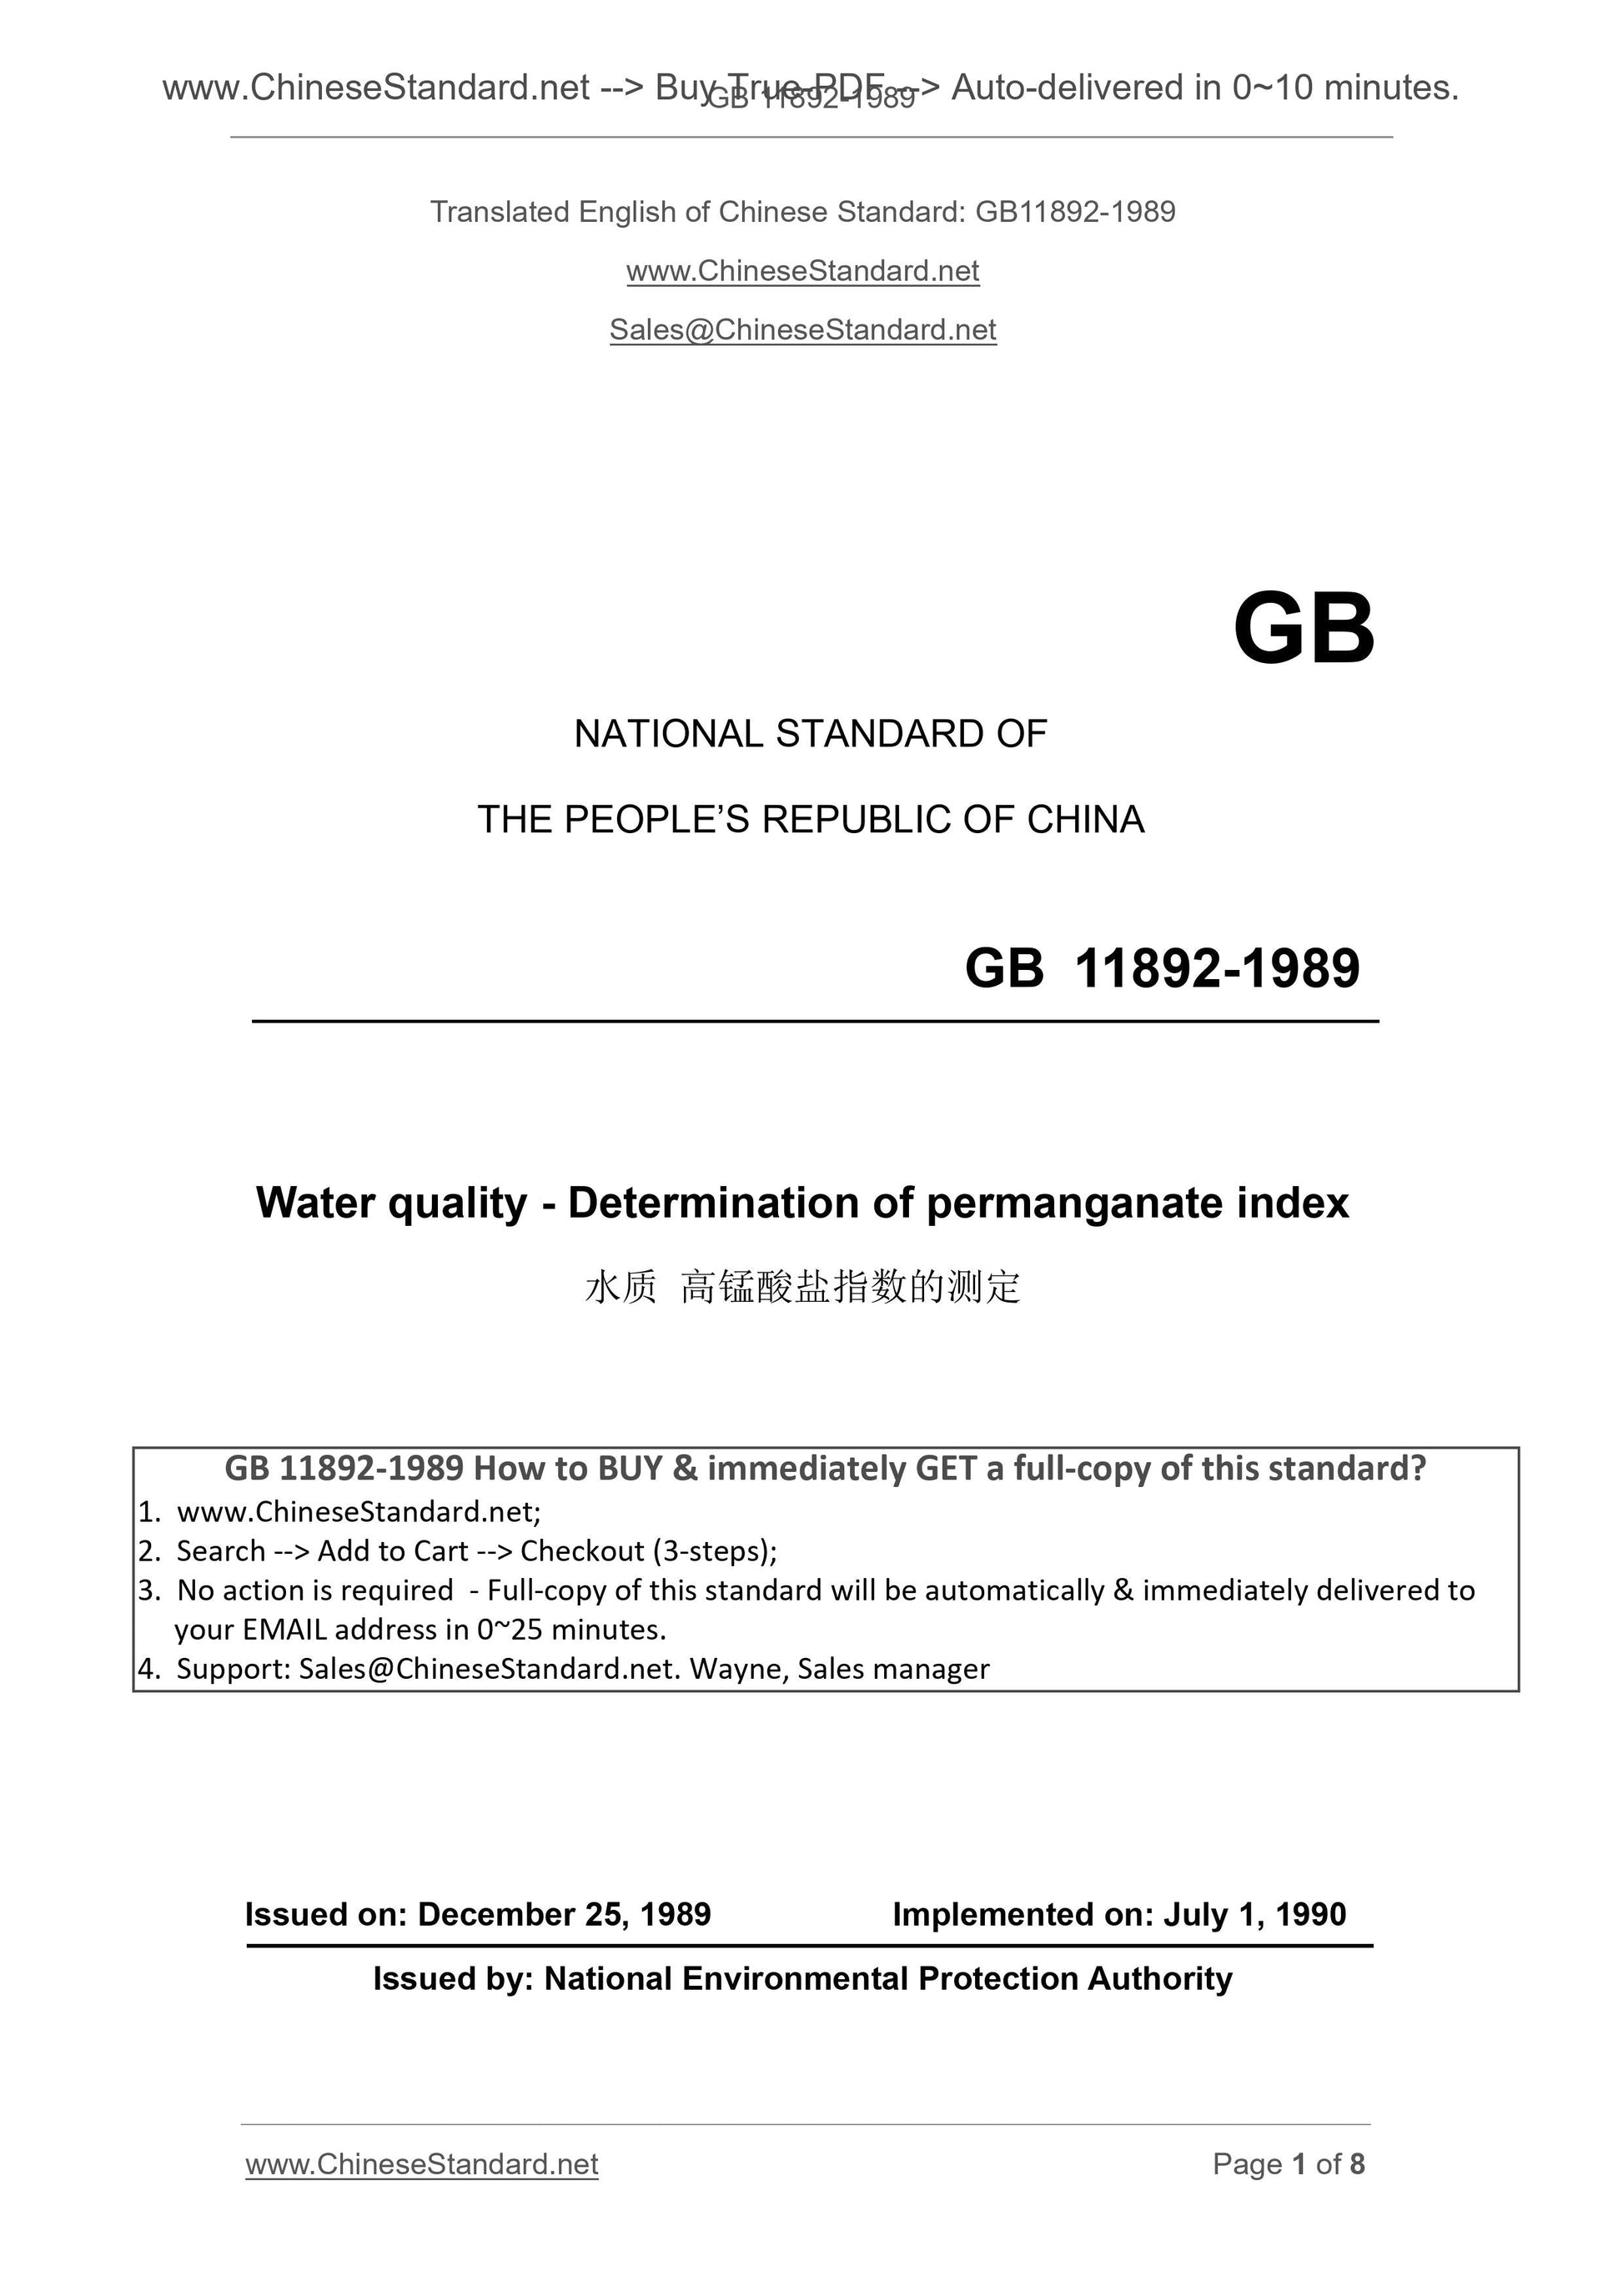 GB/T 11892-1989 Page 1